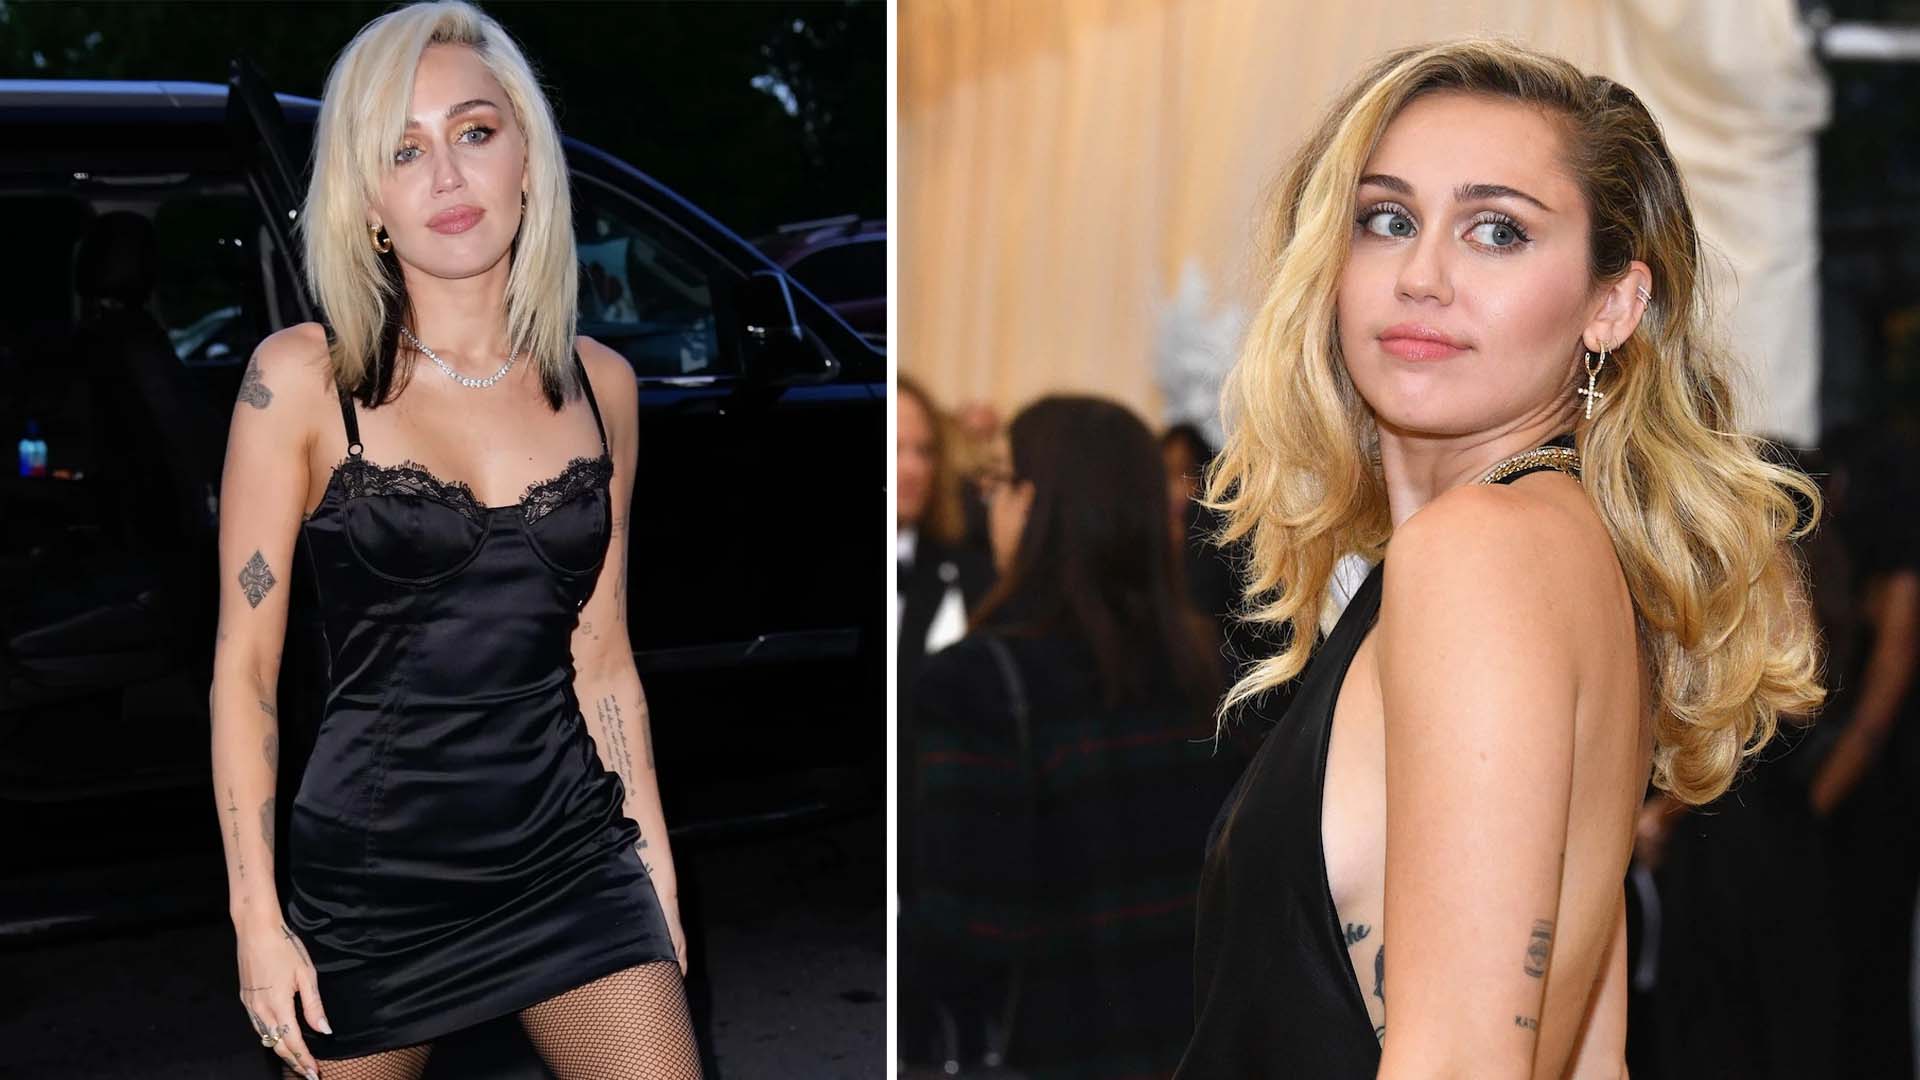 Miley Cyrus Relationship Status, Net worth, Previous Projects